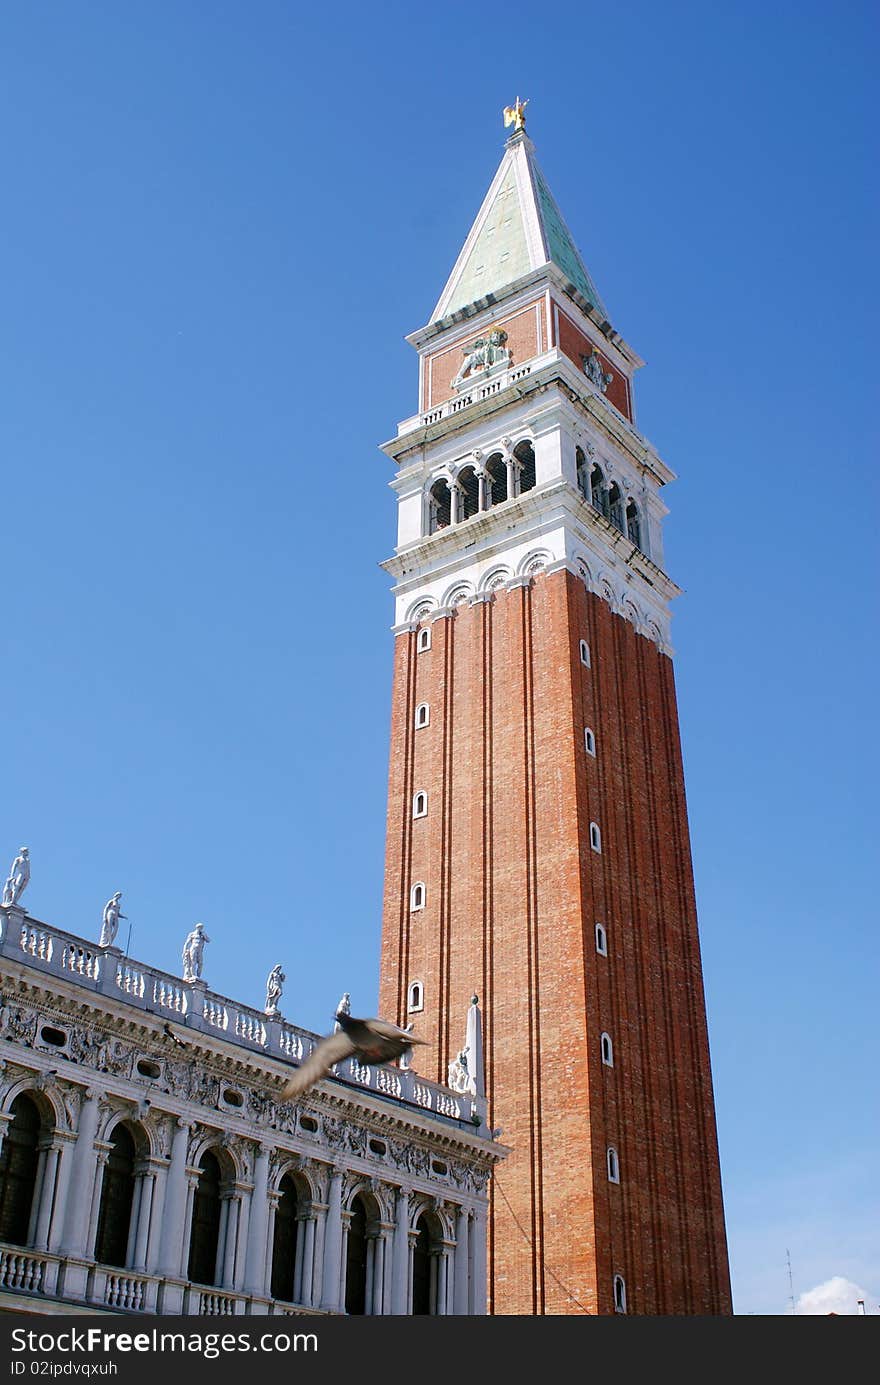 A photo shows the Campanile in San Marco square of Venice, and photo taken in 2008. A photo shows the Campanile in San Marco square of Venice, and photo taken in 2008